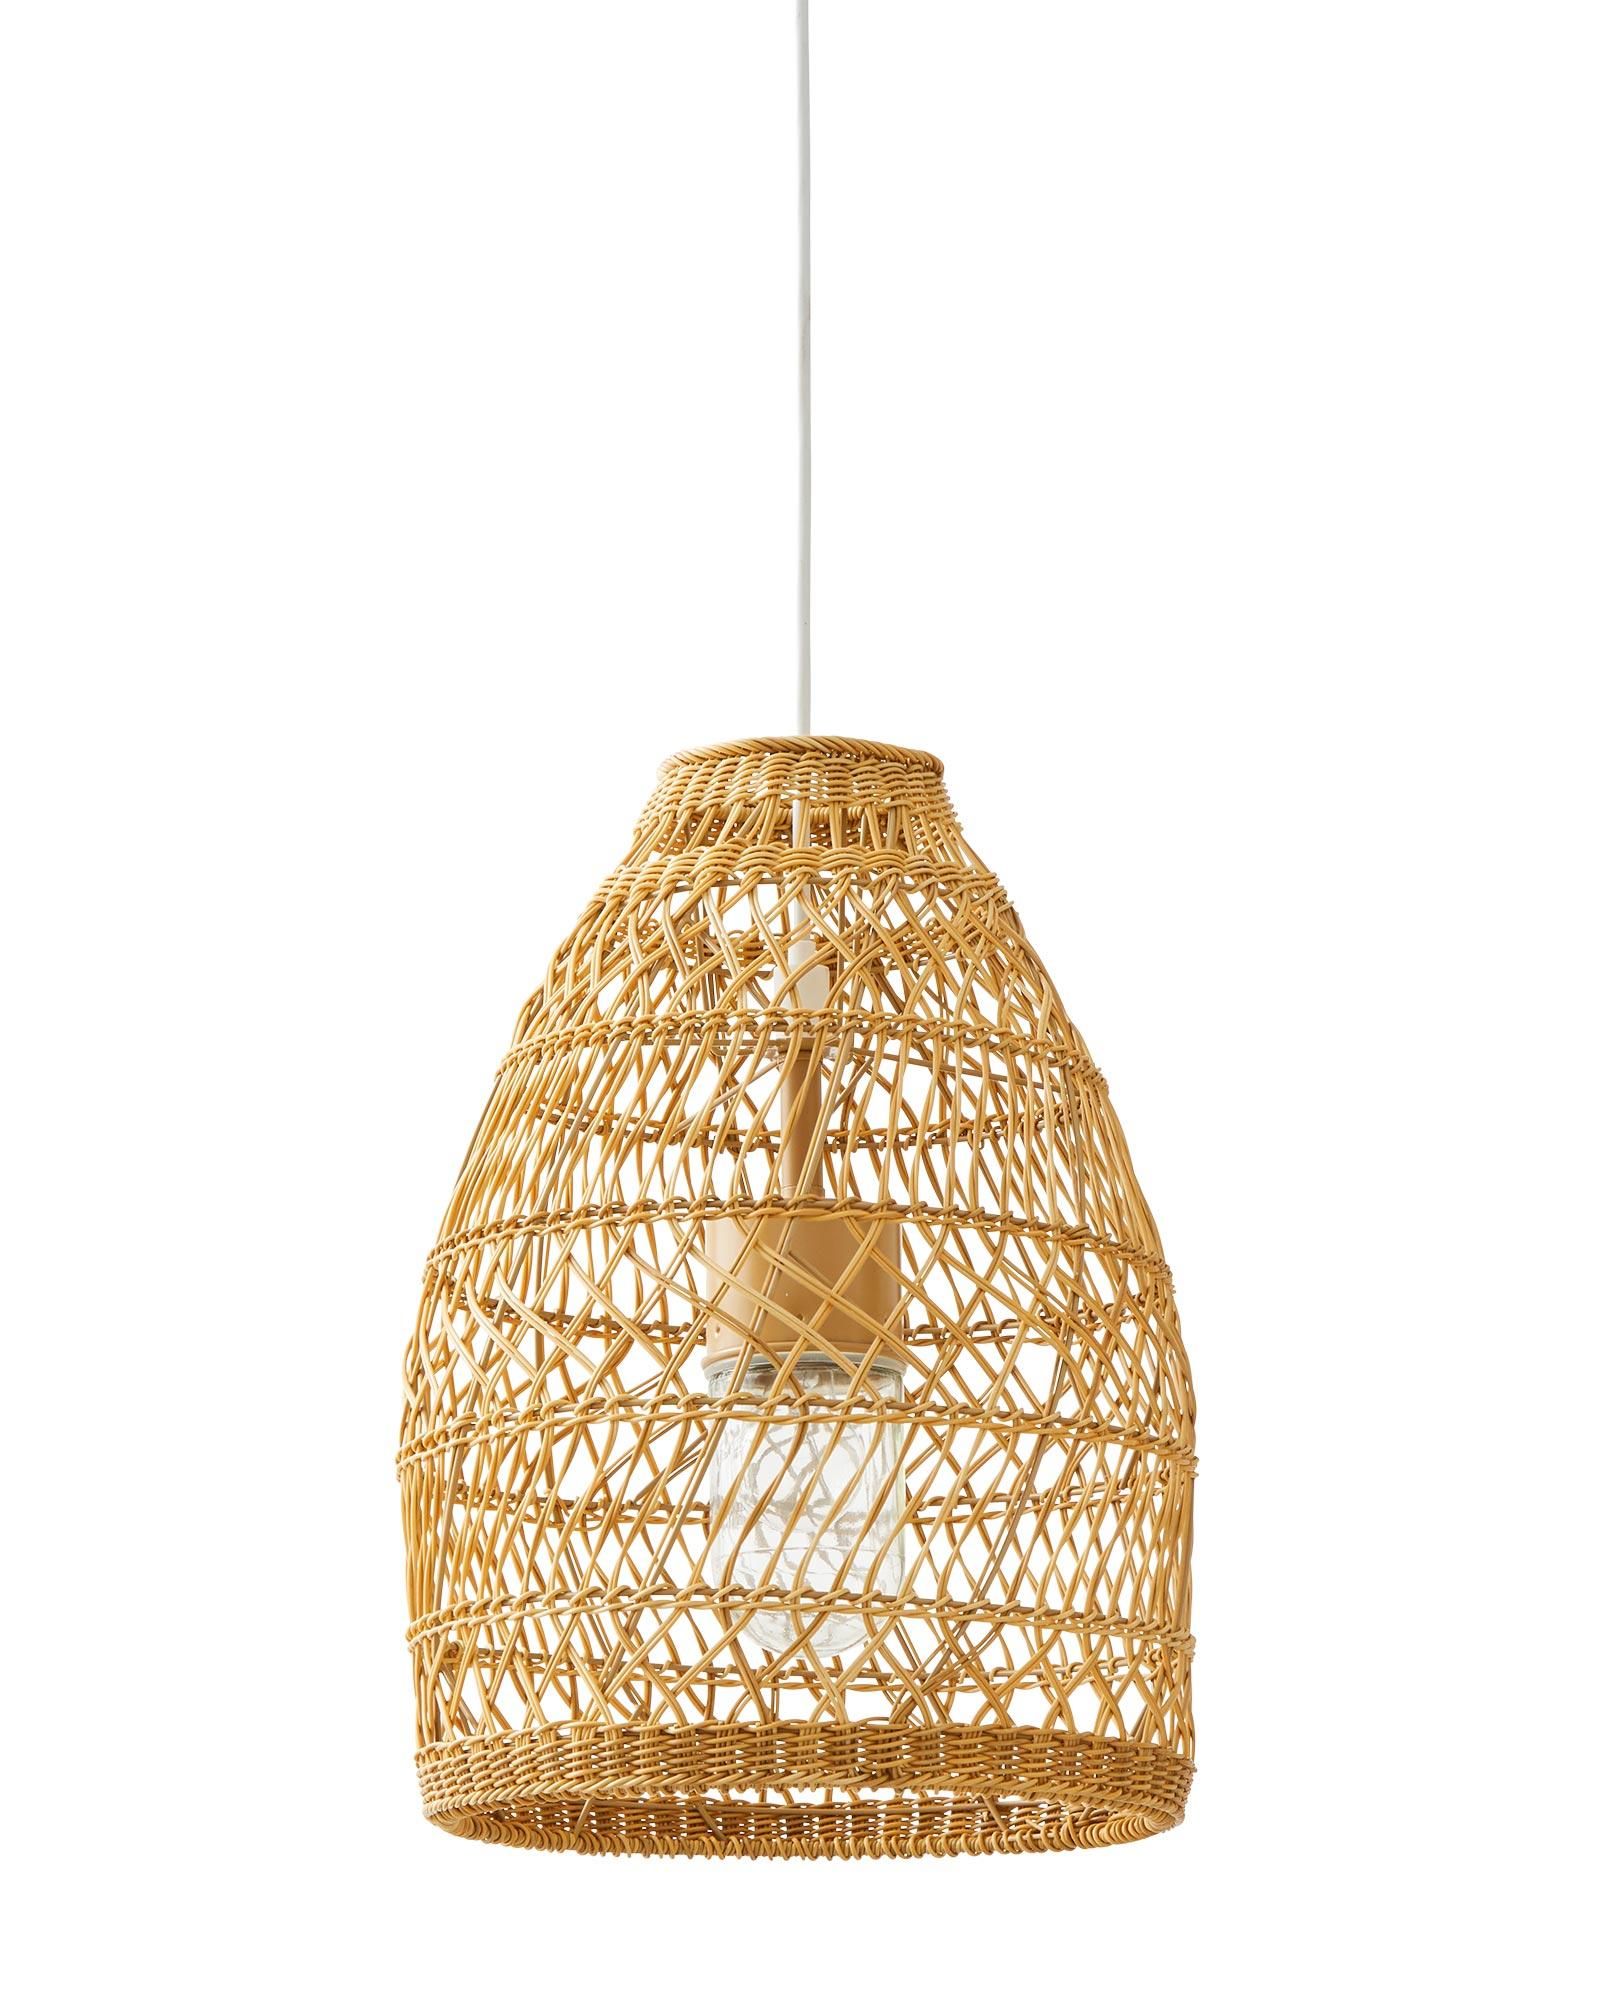 Summerland Outdoor Bell Pendant | Serena and Lily